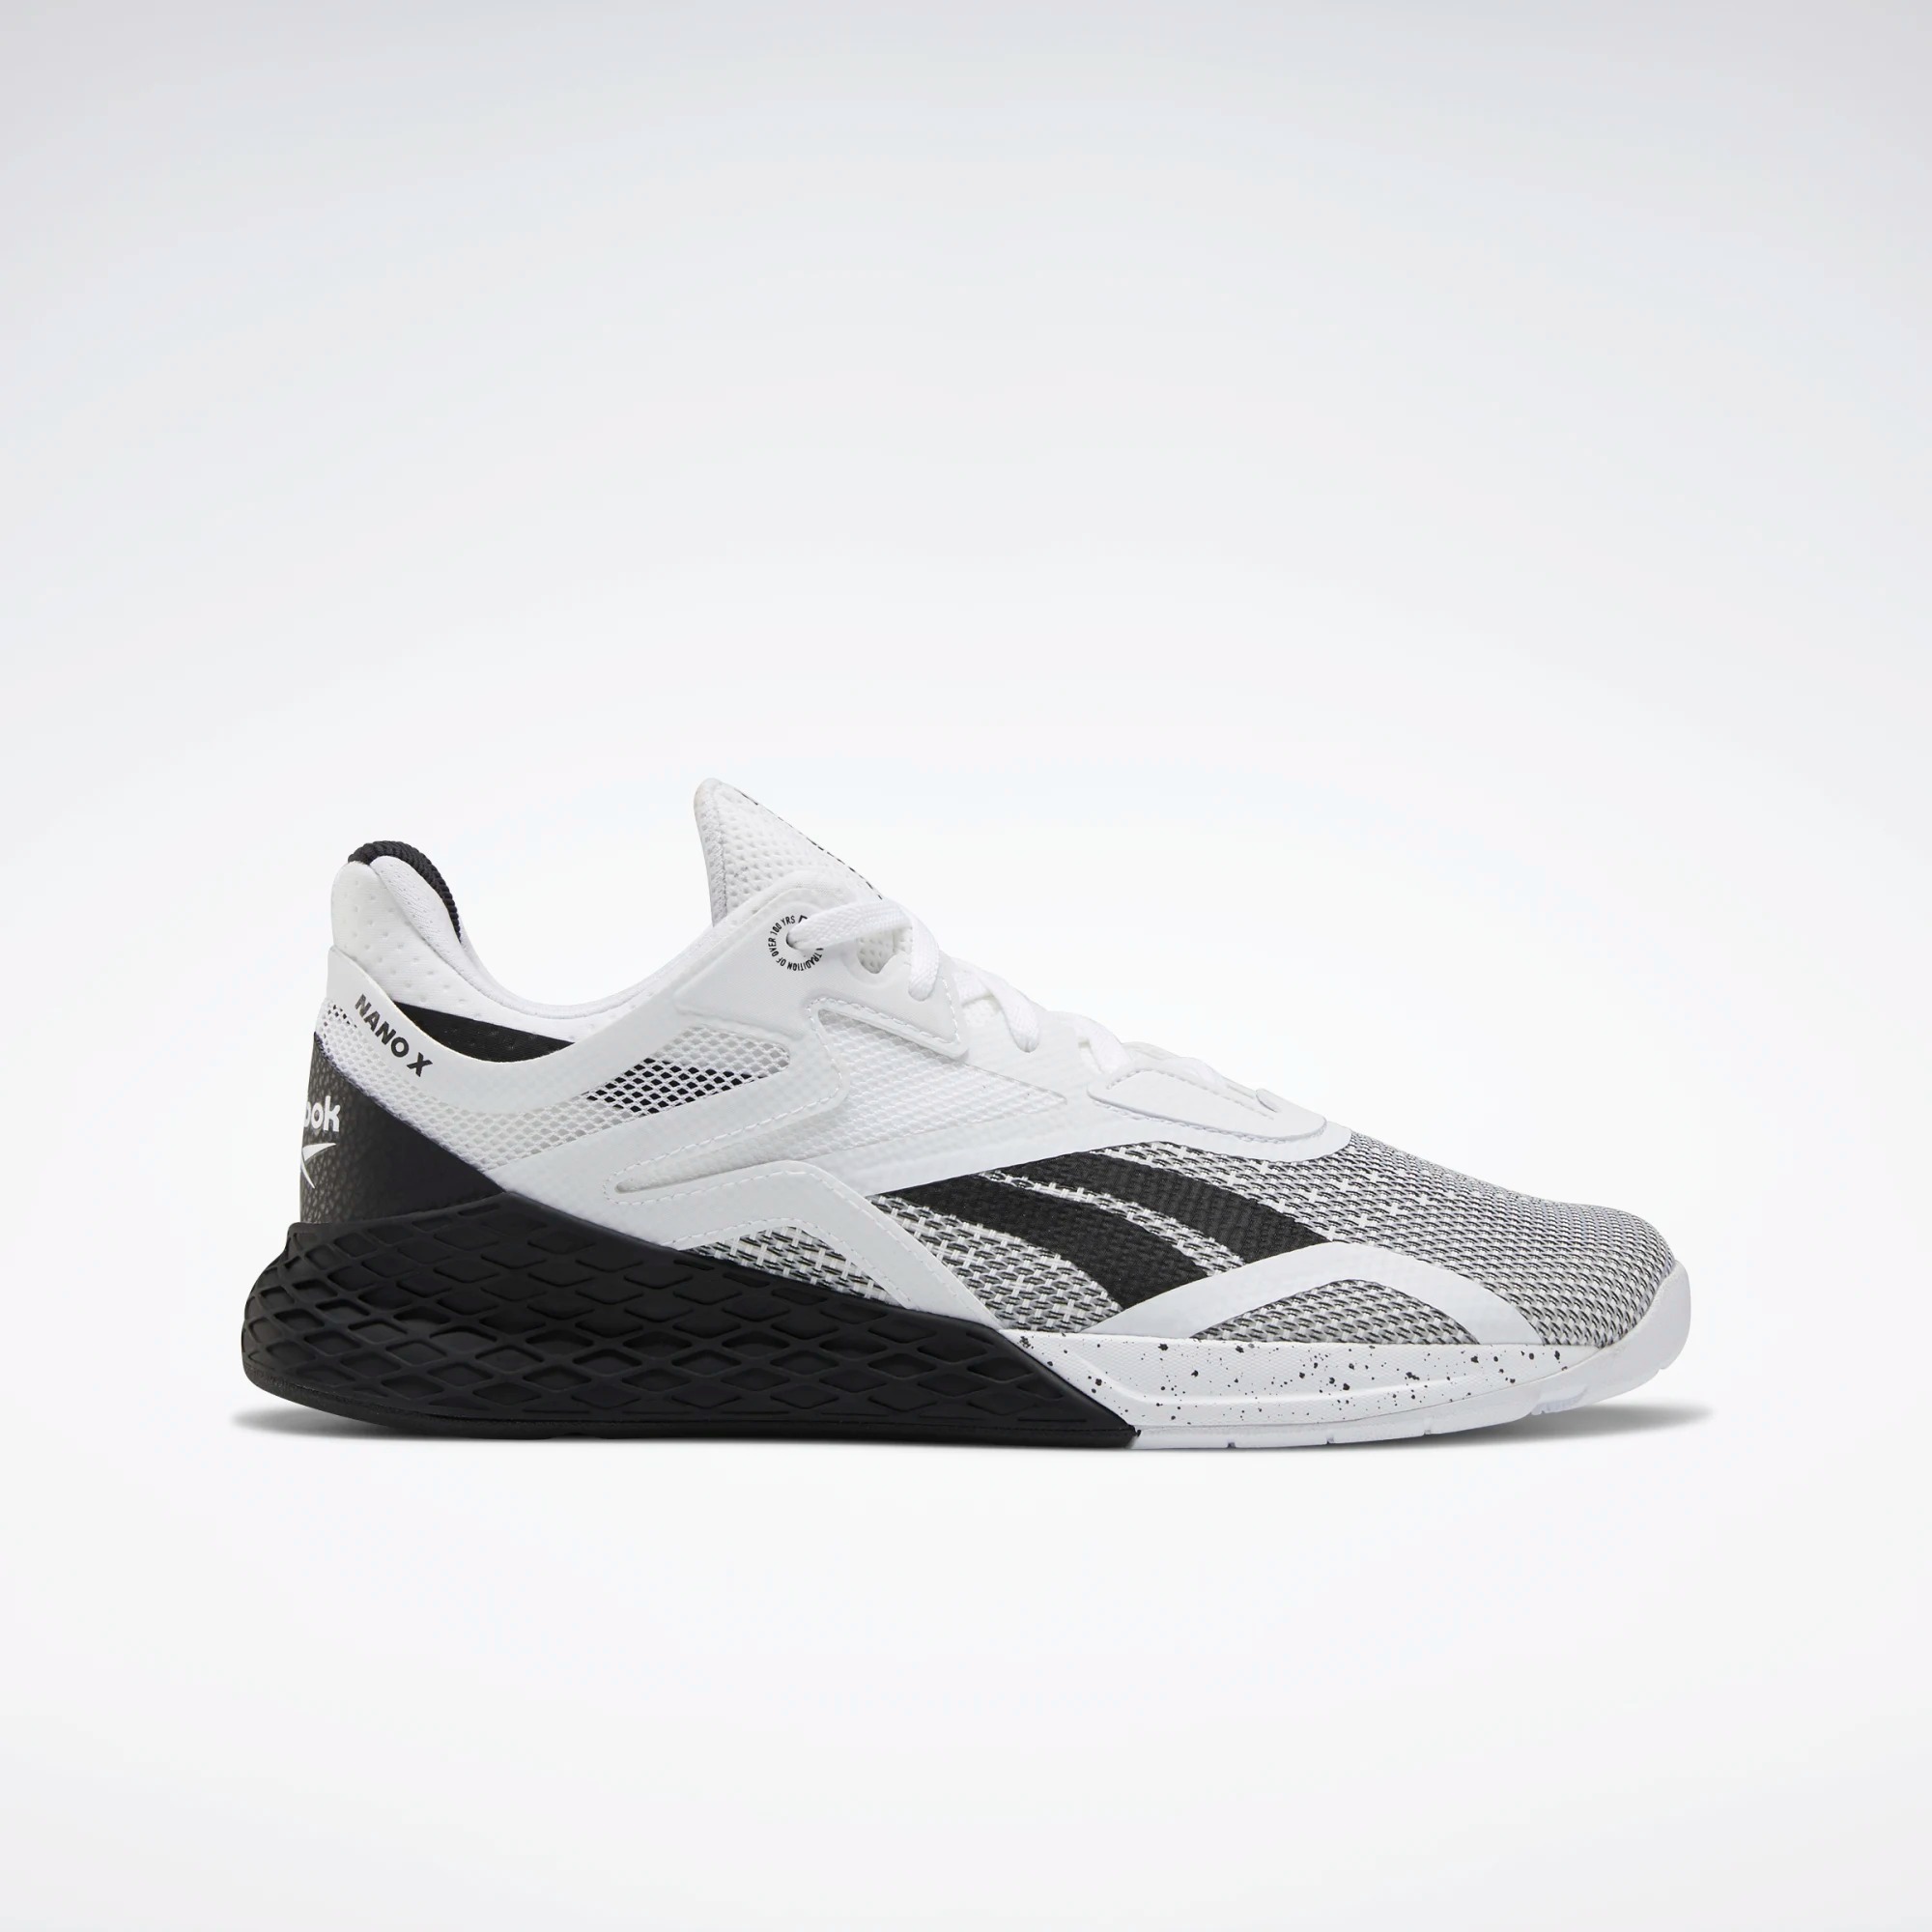 Reebok Nano Xs $40.00 limited colors and sizes